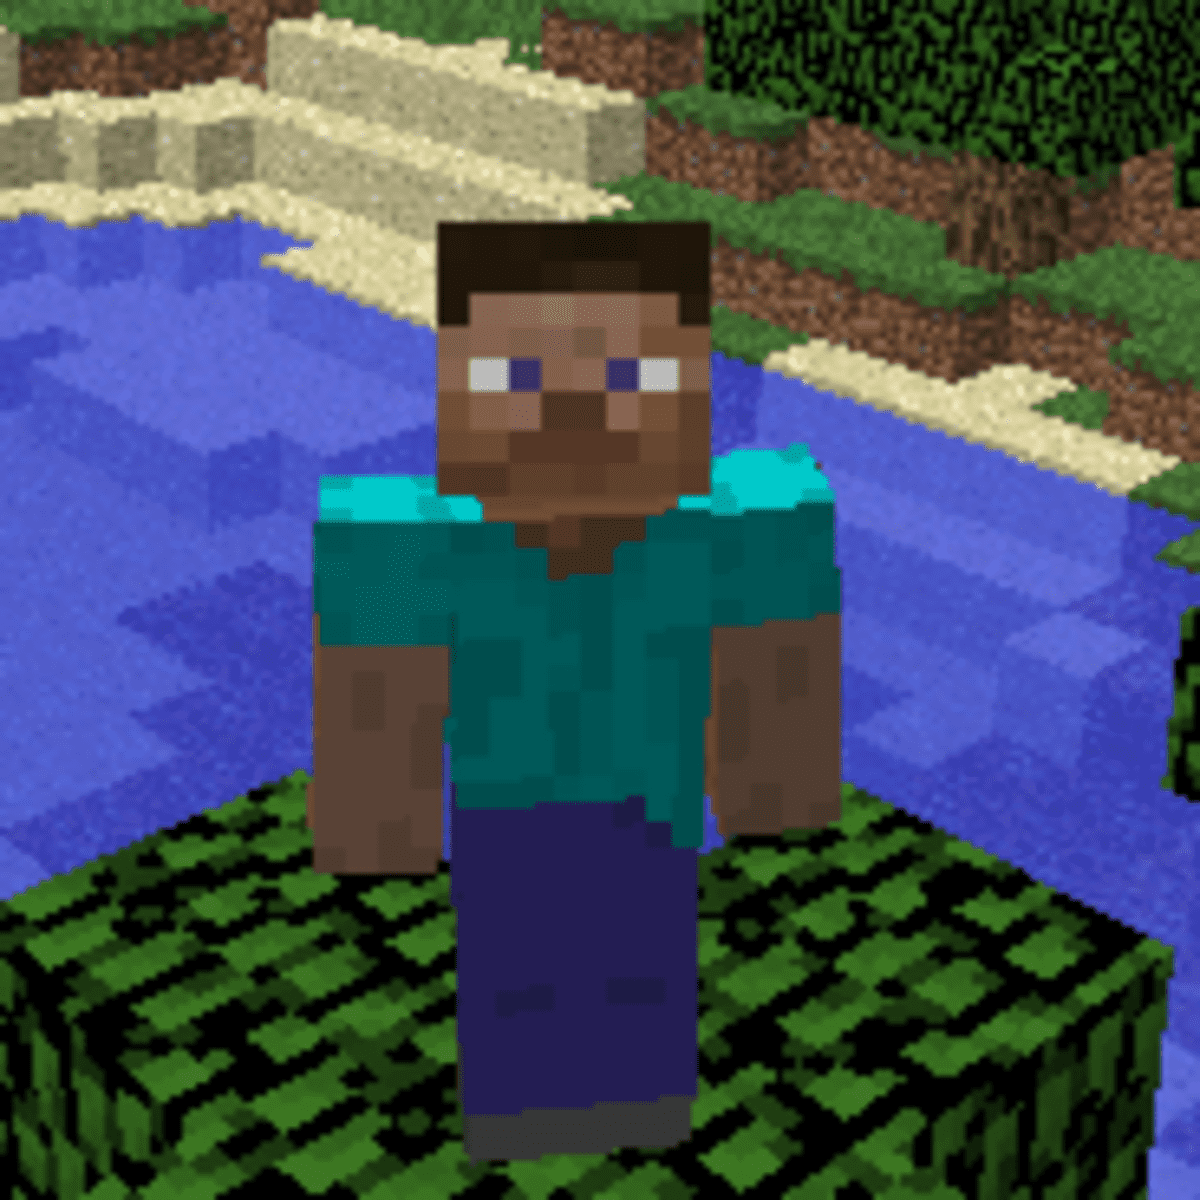 Changing Your Minecraft Skin on PC - Guide